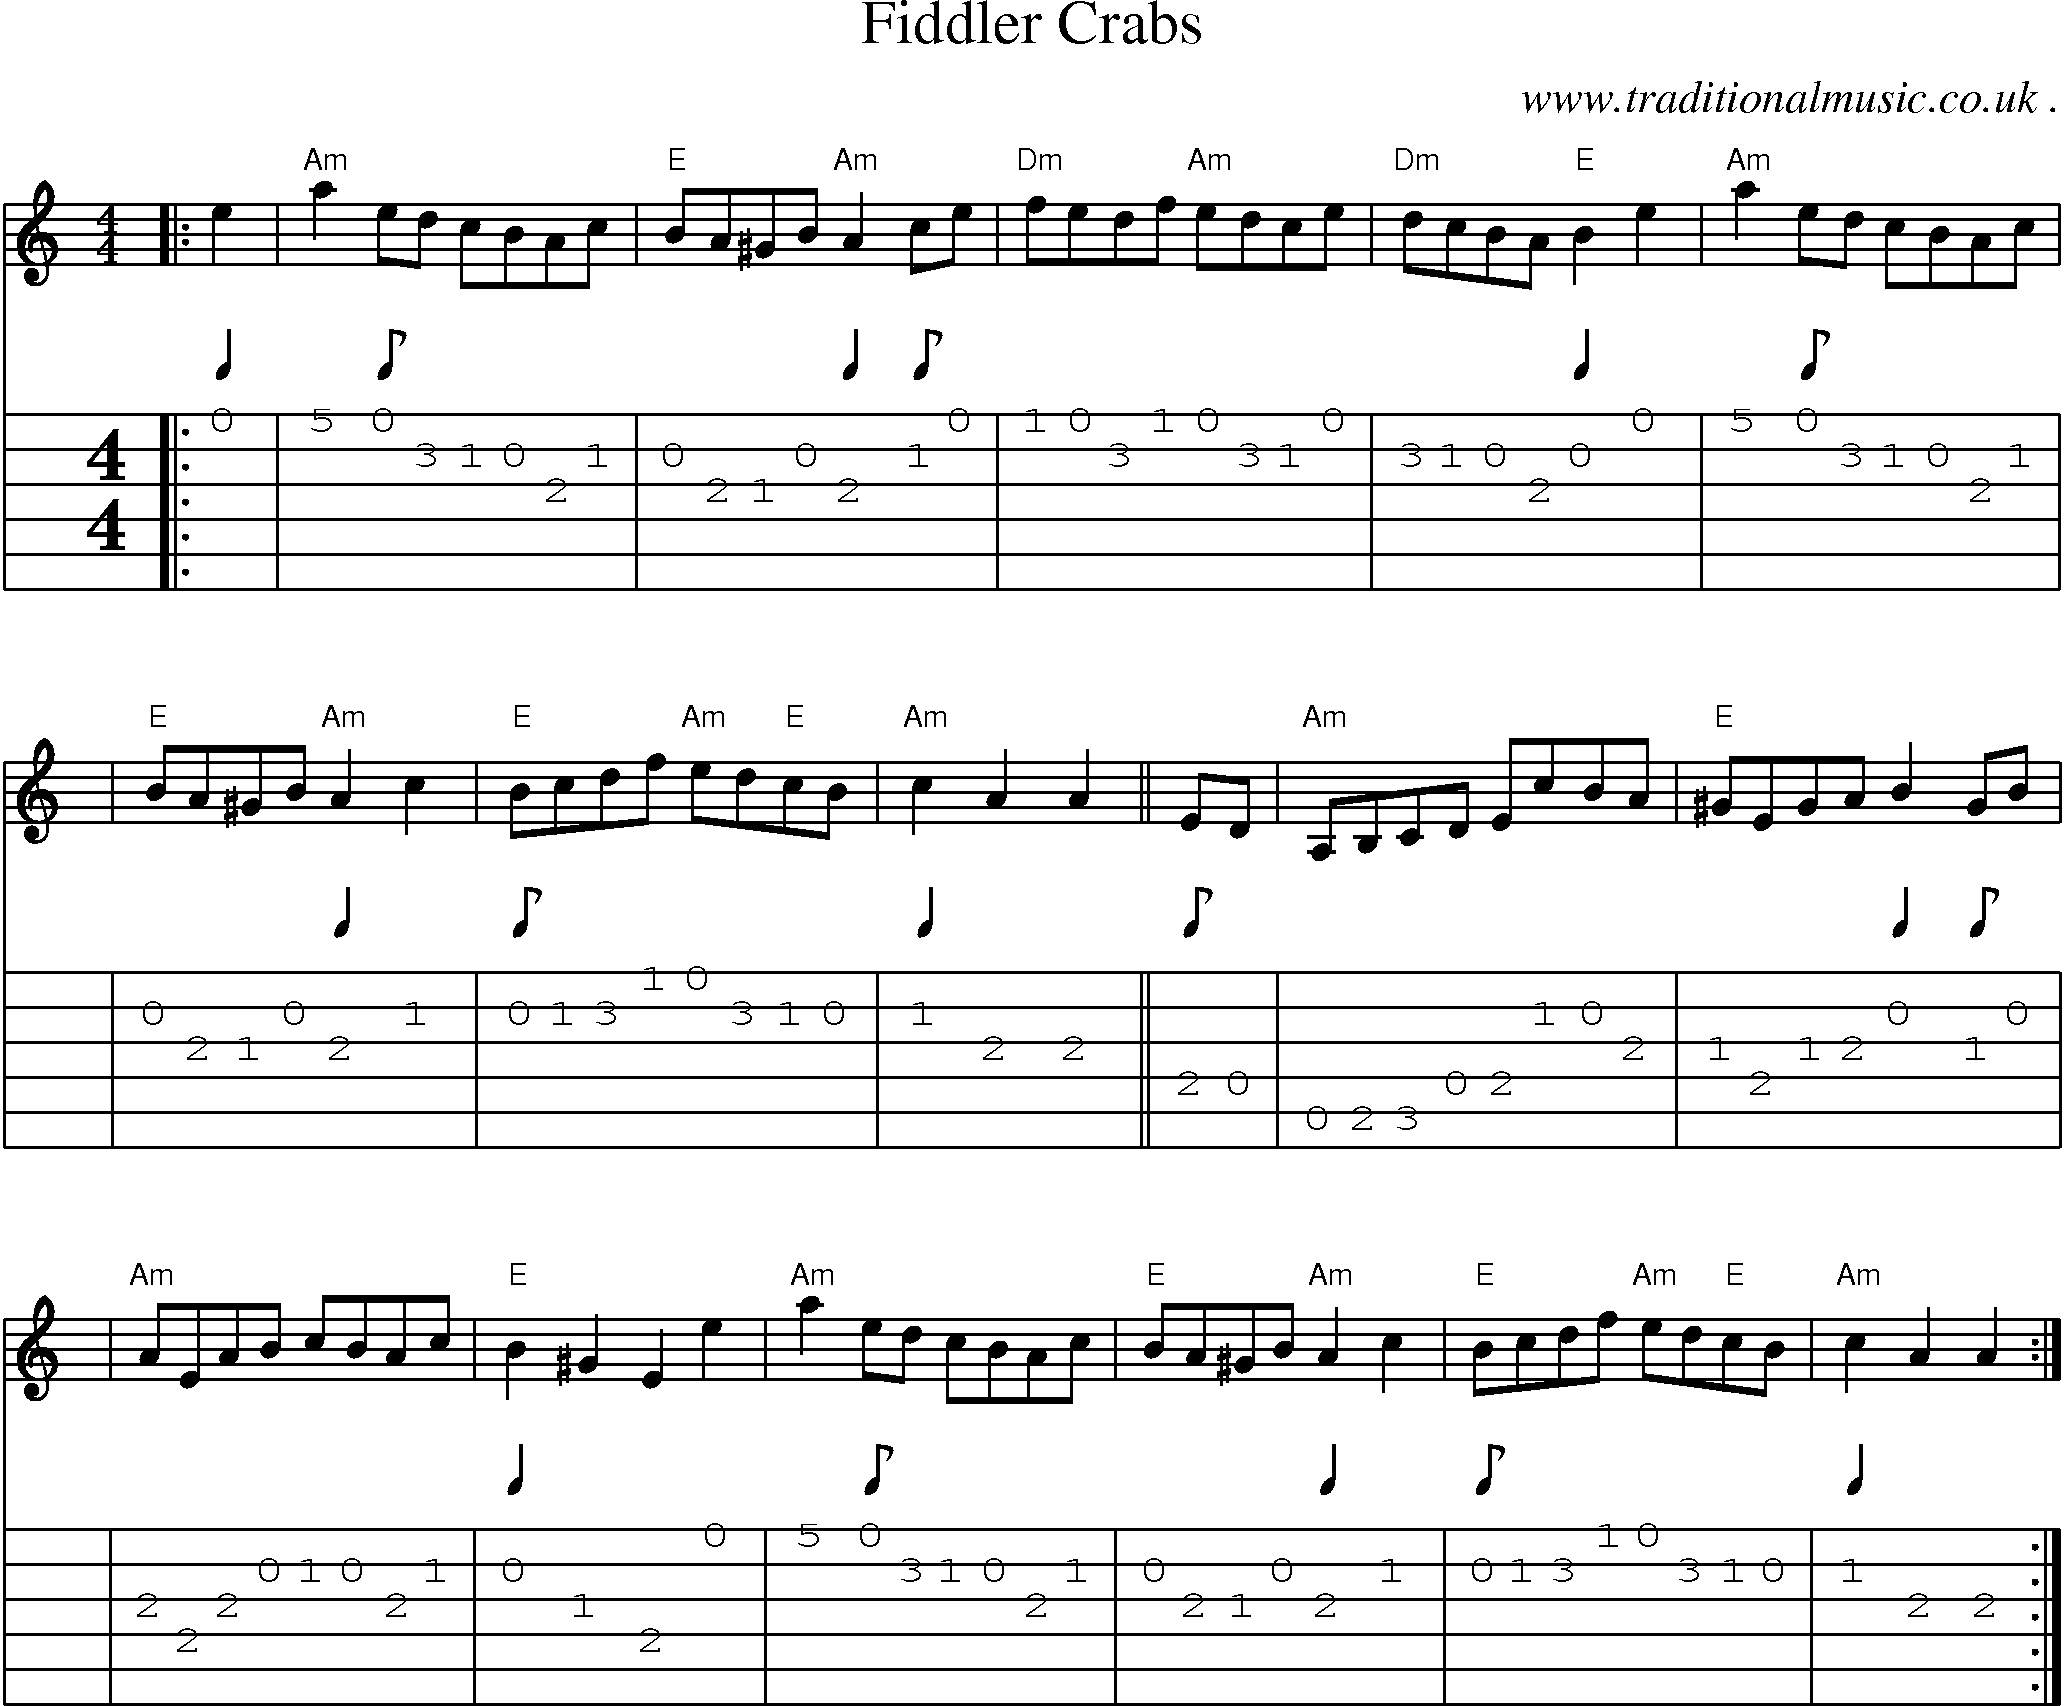 Sheet-music  score, Chords and Guitar Tabs for Fiddler Crabs